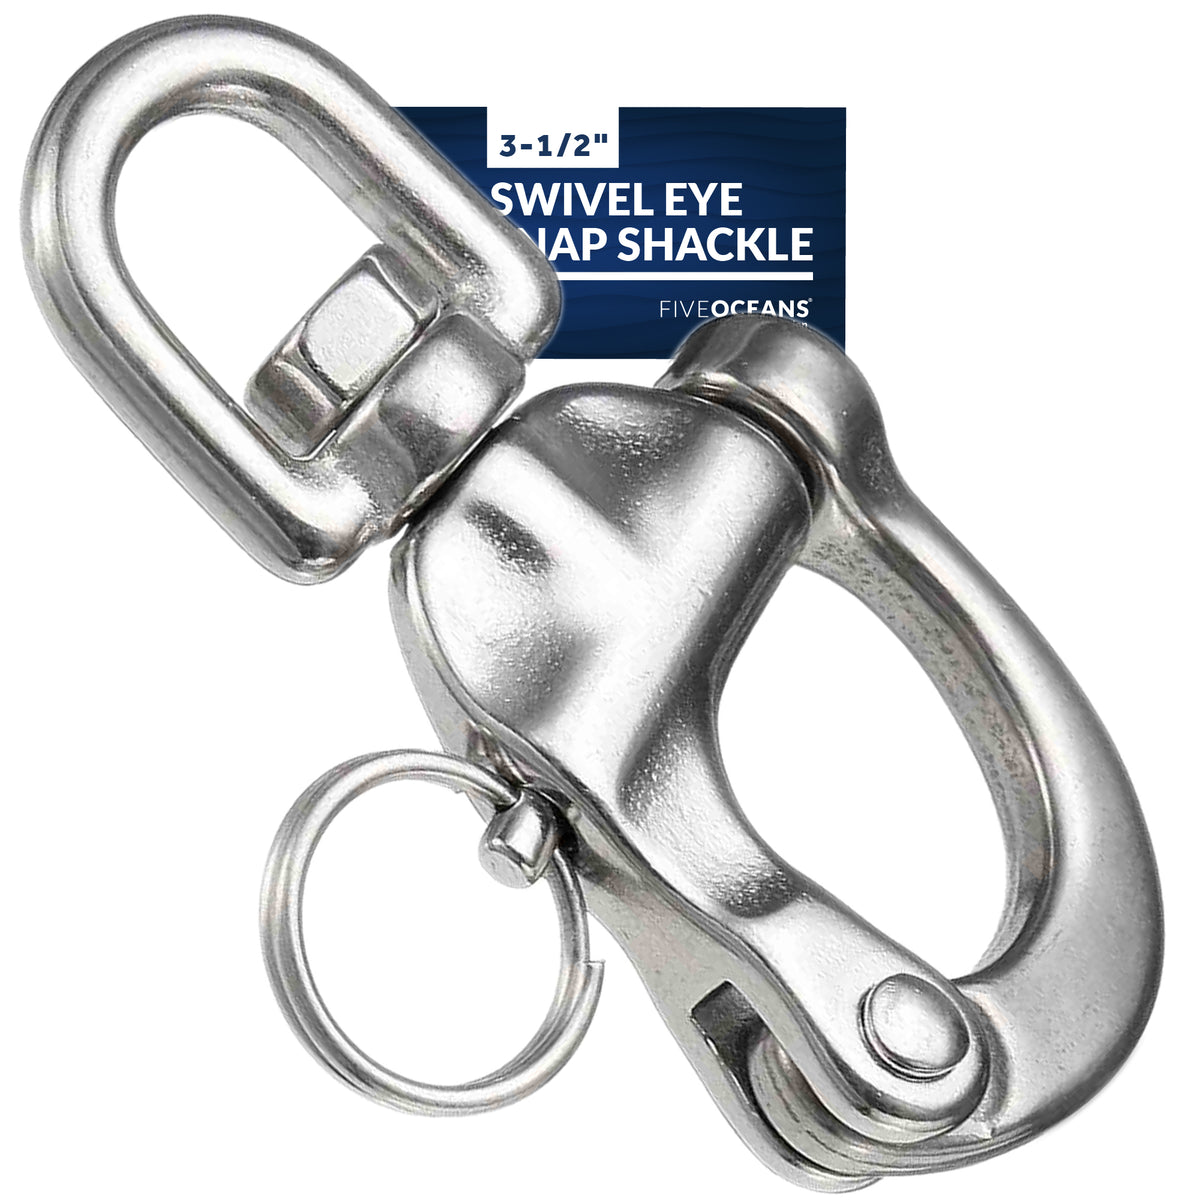 AOKLIT 4 Pack Stainless Steel Swivel Eye Snap Hook M6(2#) Marine Boat  Hardware Spring Buckle for Bird Feeders, Pet Chains, Dog Tie-Out Cable,  Keychains and More (4 x 1-1/2 inch) : 